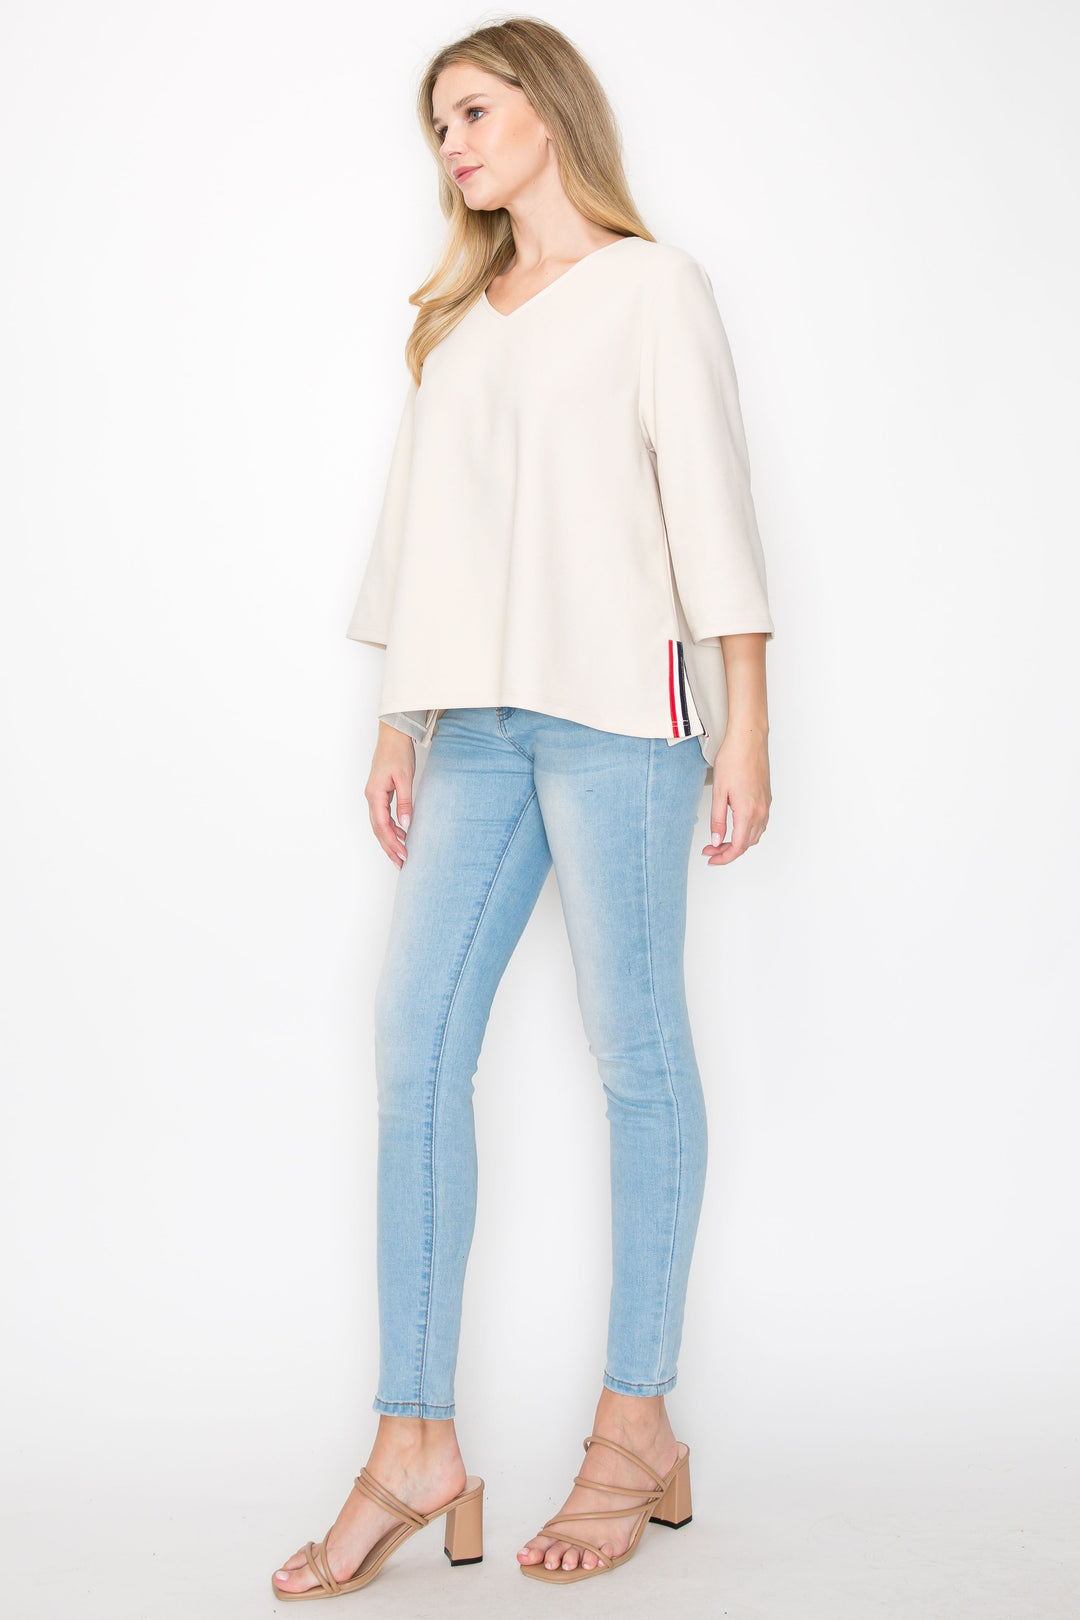 Kanna Knit Crepe Top with Contrast Stripes